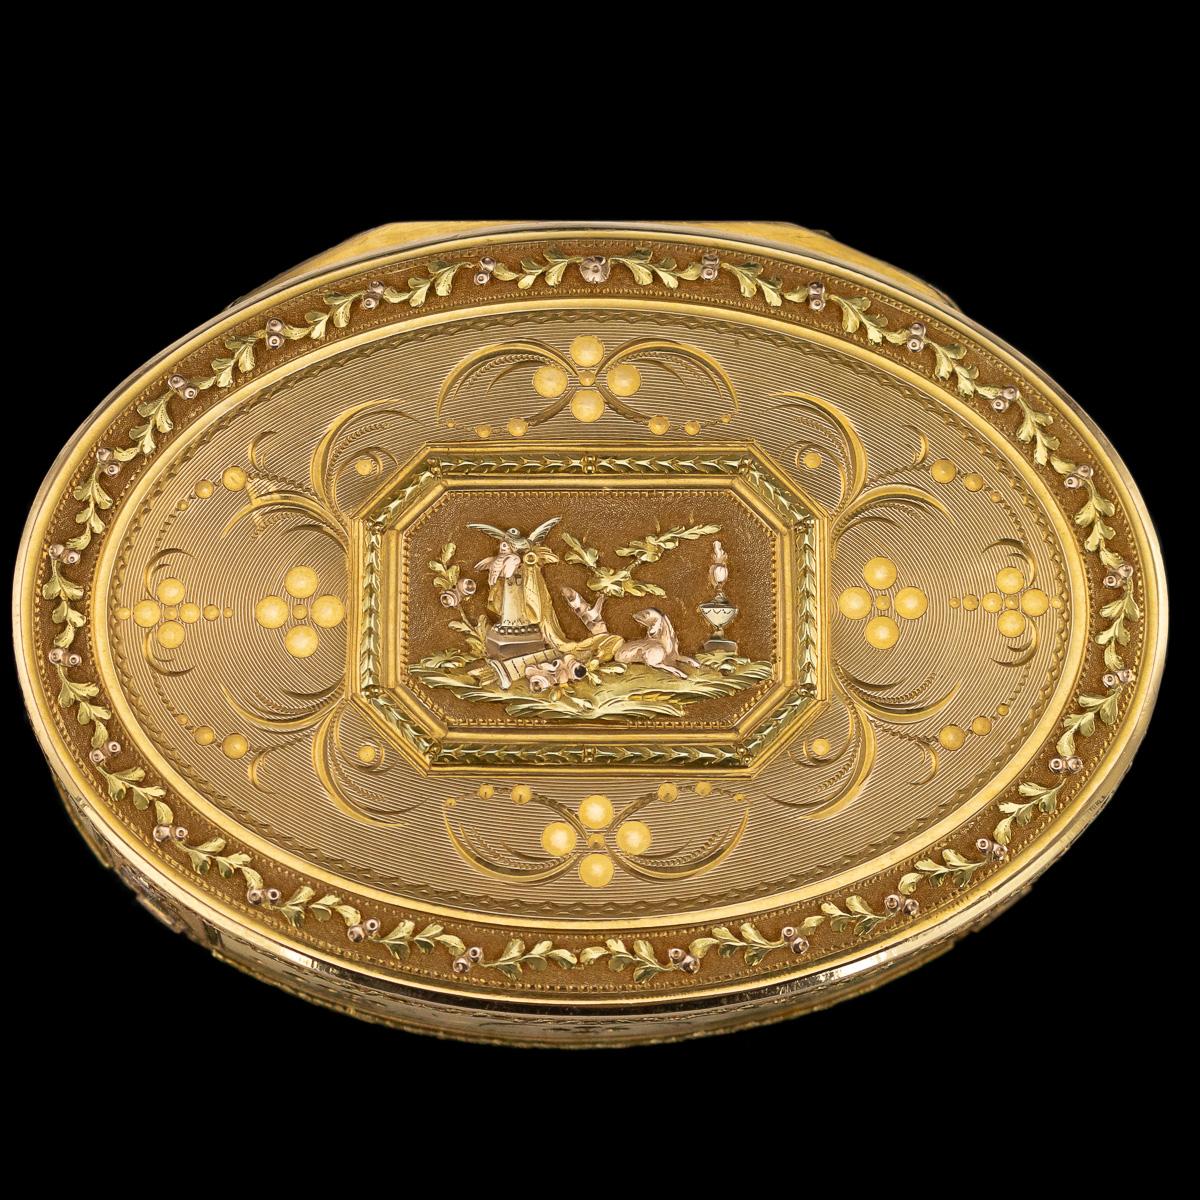 Antique late 18th century Swiss magnificent three-colored 18-karat gold snuff box, of oval form, the lid chased in colored golds with a scene of a dog running away from birds over a basket of flowers, decorated with fine floral scrollwork and